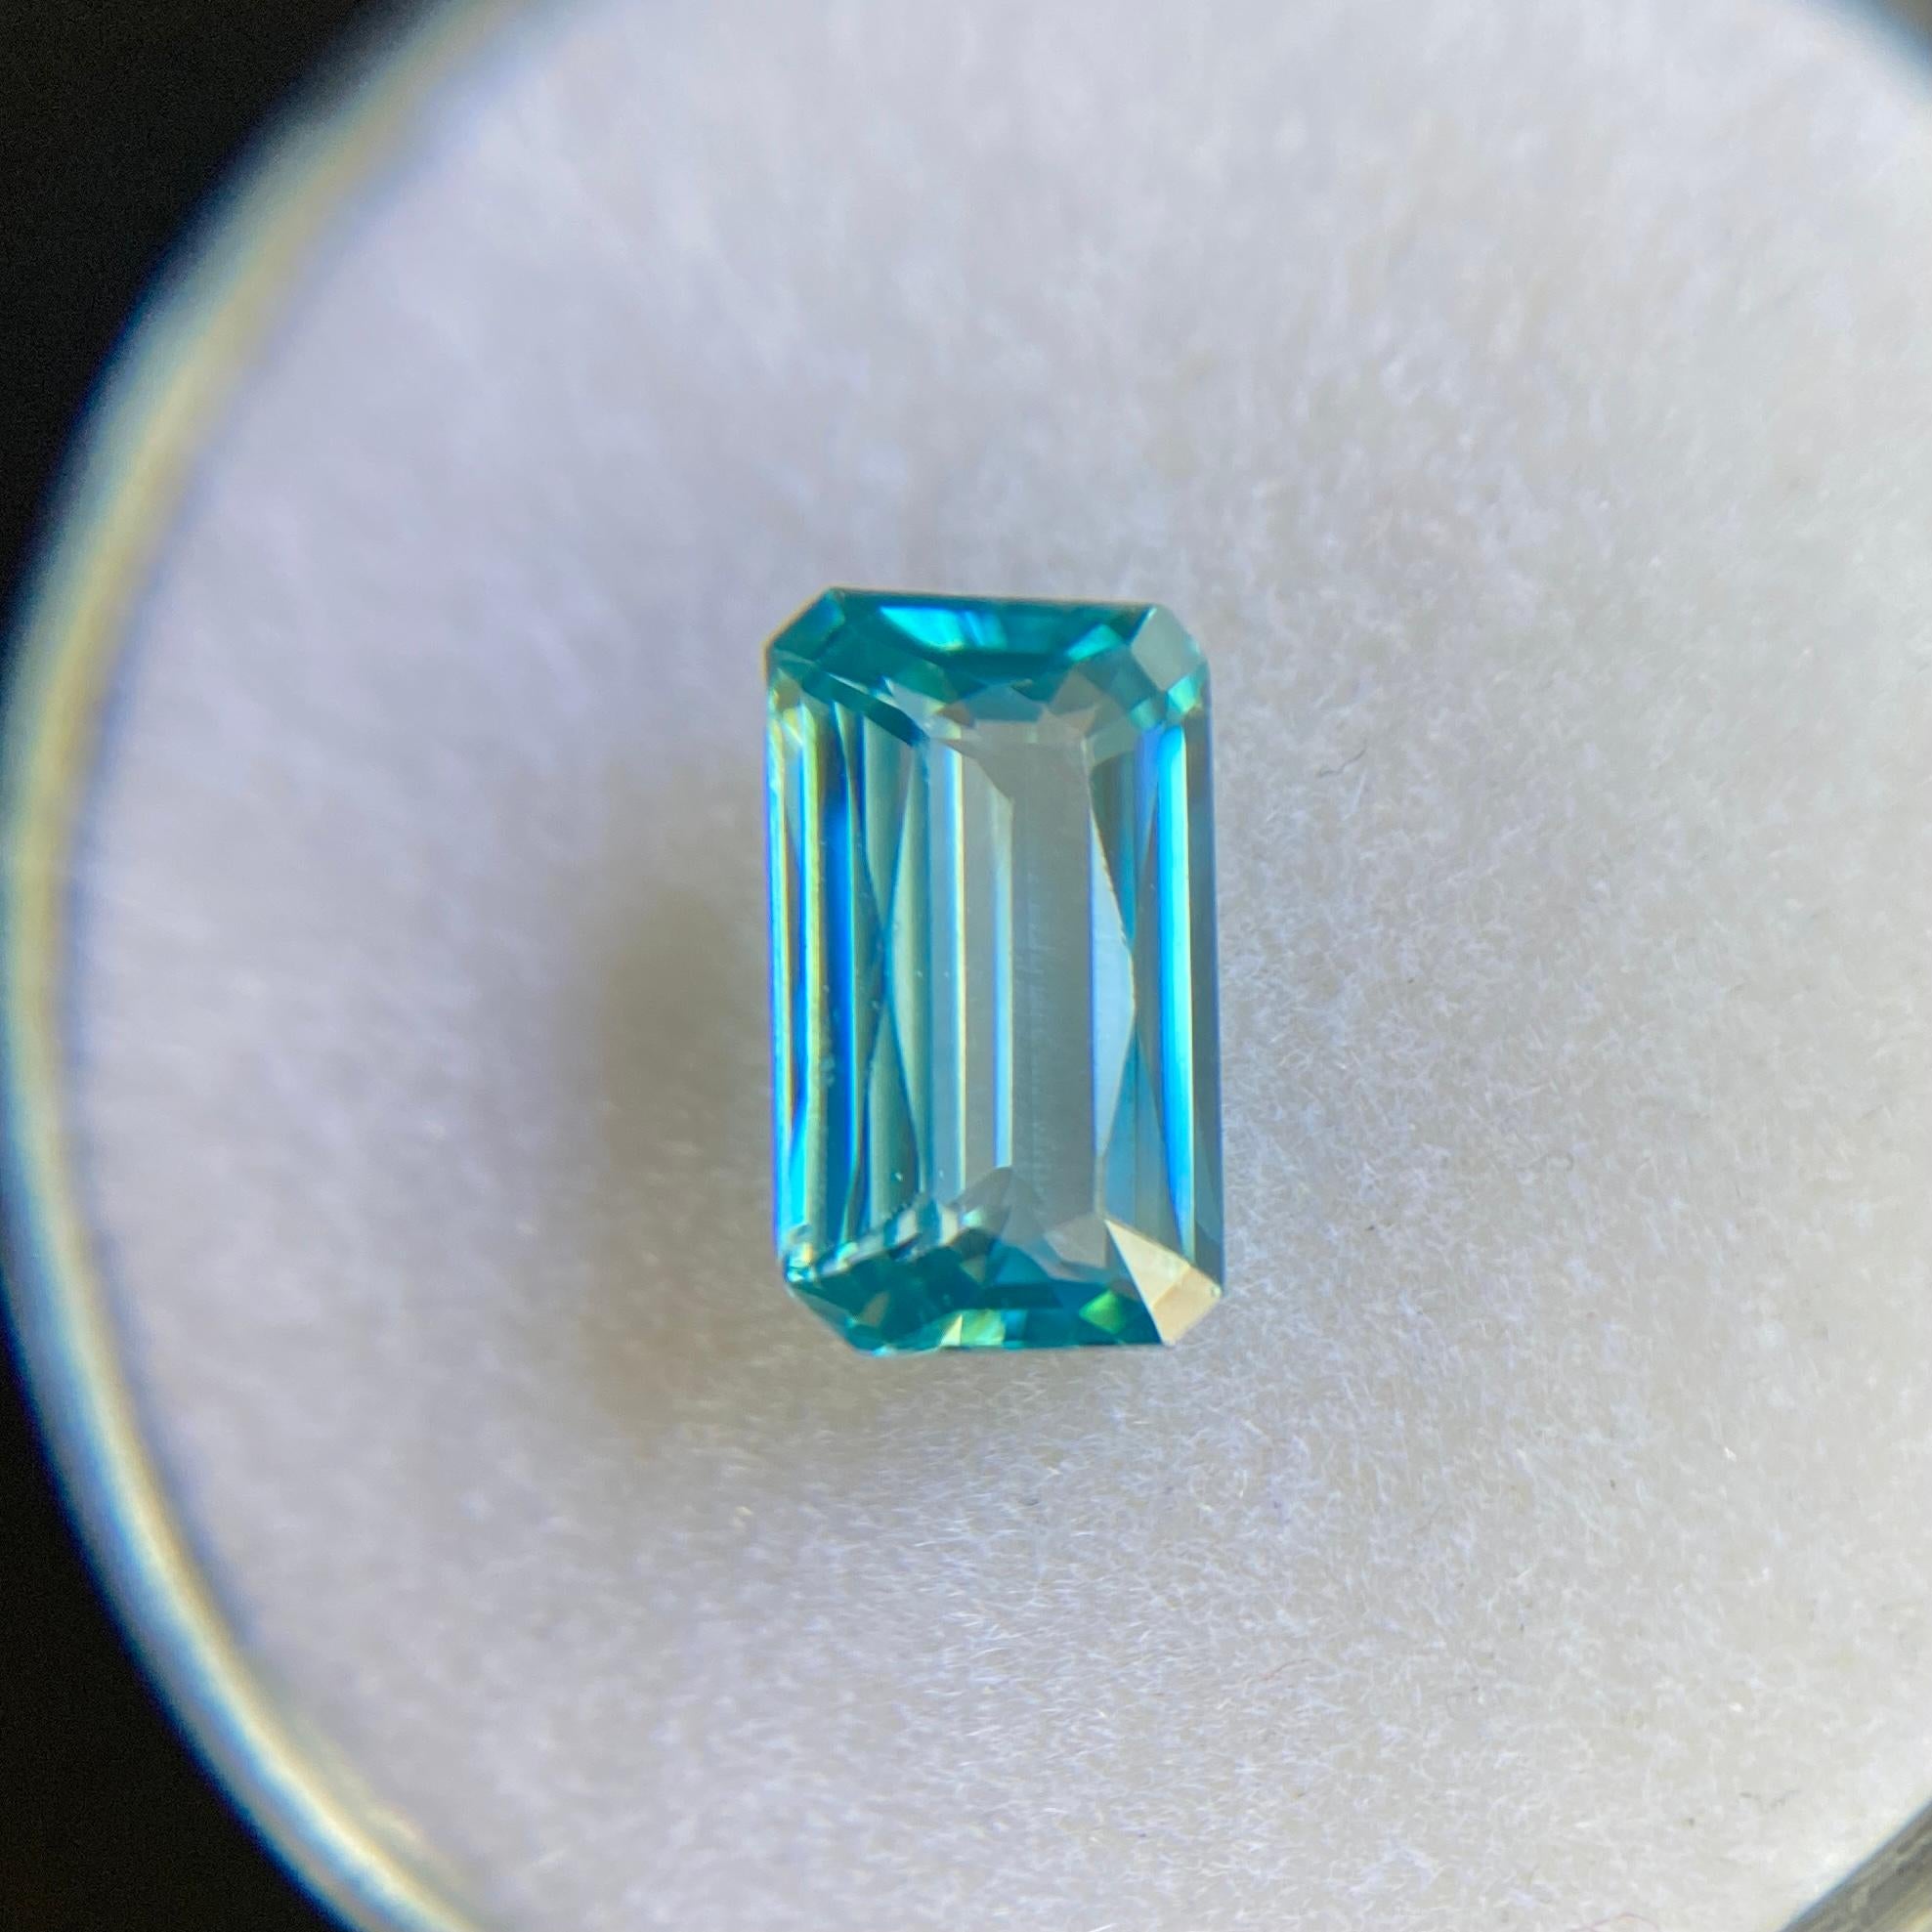 Fine Natural Loose Blue Zircon Gemstone.

Stunning 1.71 carat stone with a beautiful vivid blue colour and excellent clarity. Practically flawless.

Also has an excellent emerald cut with good proportions and symmetry. This shows lots of brilliance,